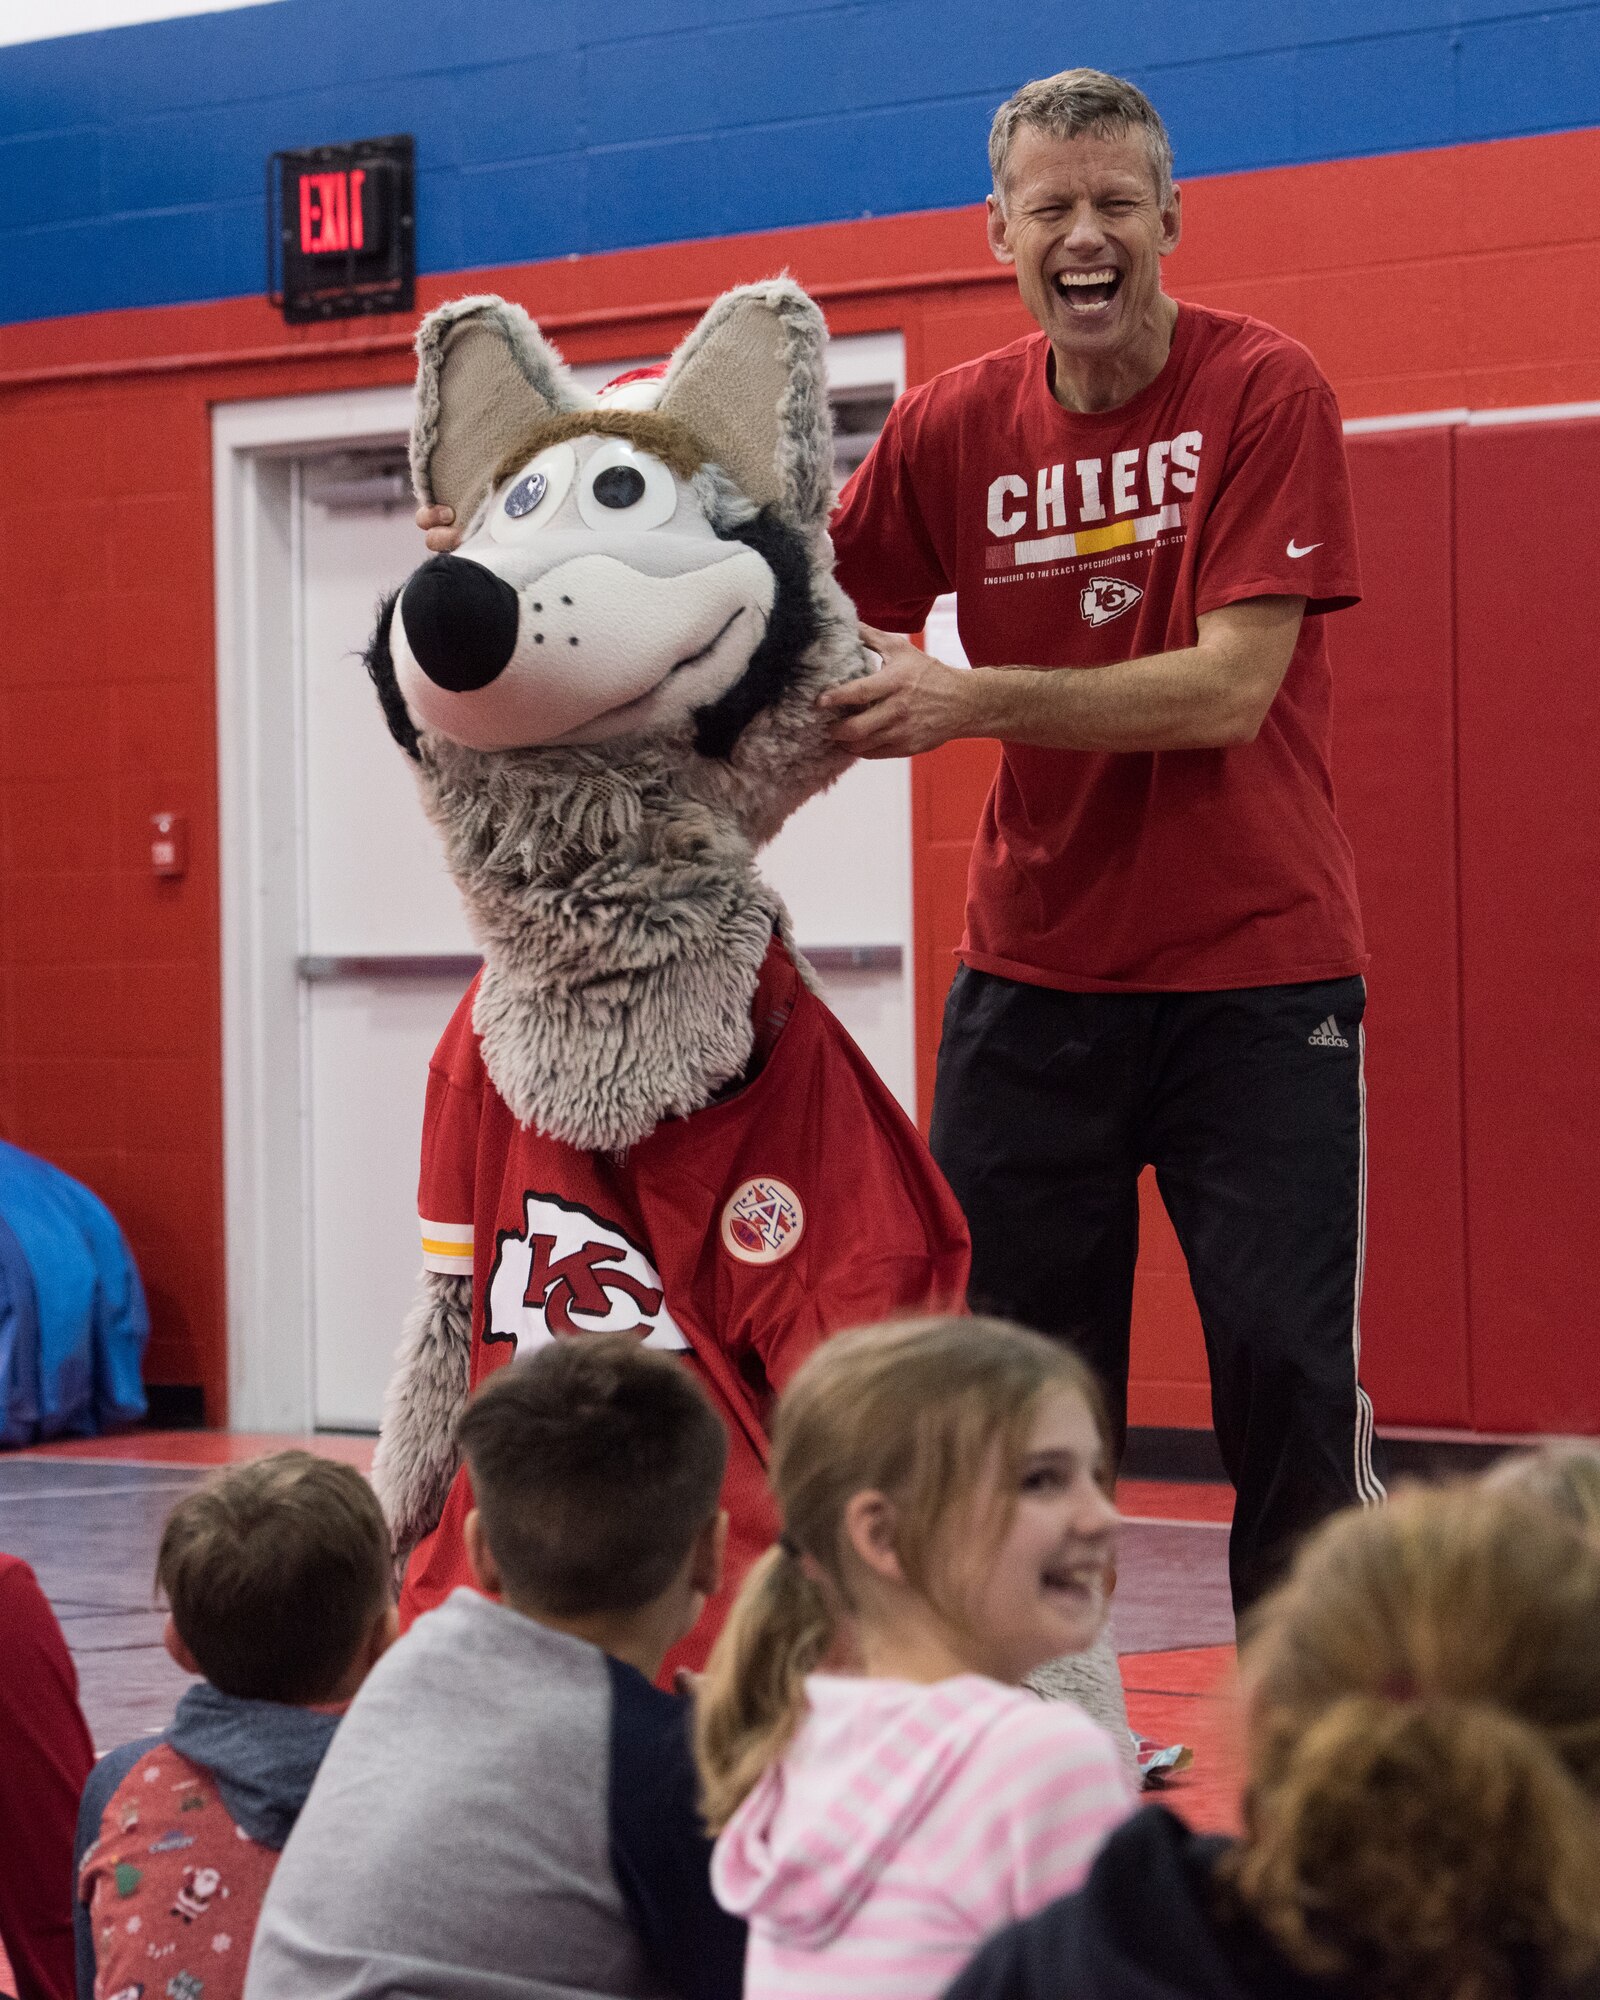 Dan Meers, the Kansas City Chiefs NFL team mascot KC Wolf, demonstrated how he gets dressed for work by allowing a volunteer to wear his suit at the Youth Center, Whiteman Air Force Base, Missouri, Dec. 18, 2019. Meers talked to the children about the importance of your attitude, behavior and character and answered questions about what life is like as a mascot as part of an outreach to positively influence their overall well-being and promote resiliency. (U.S. Air Force photo by Airman 1st Class Christina Carter)